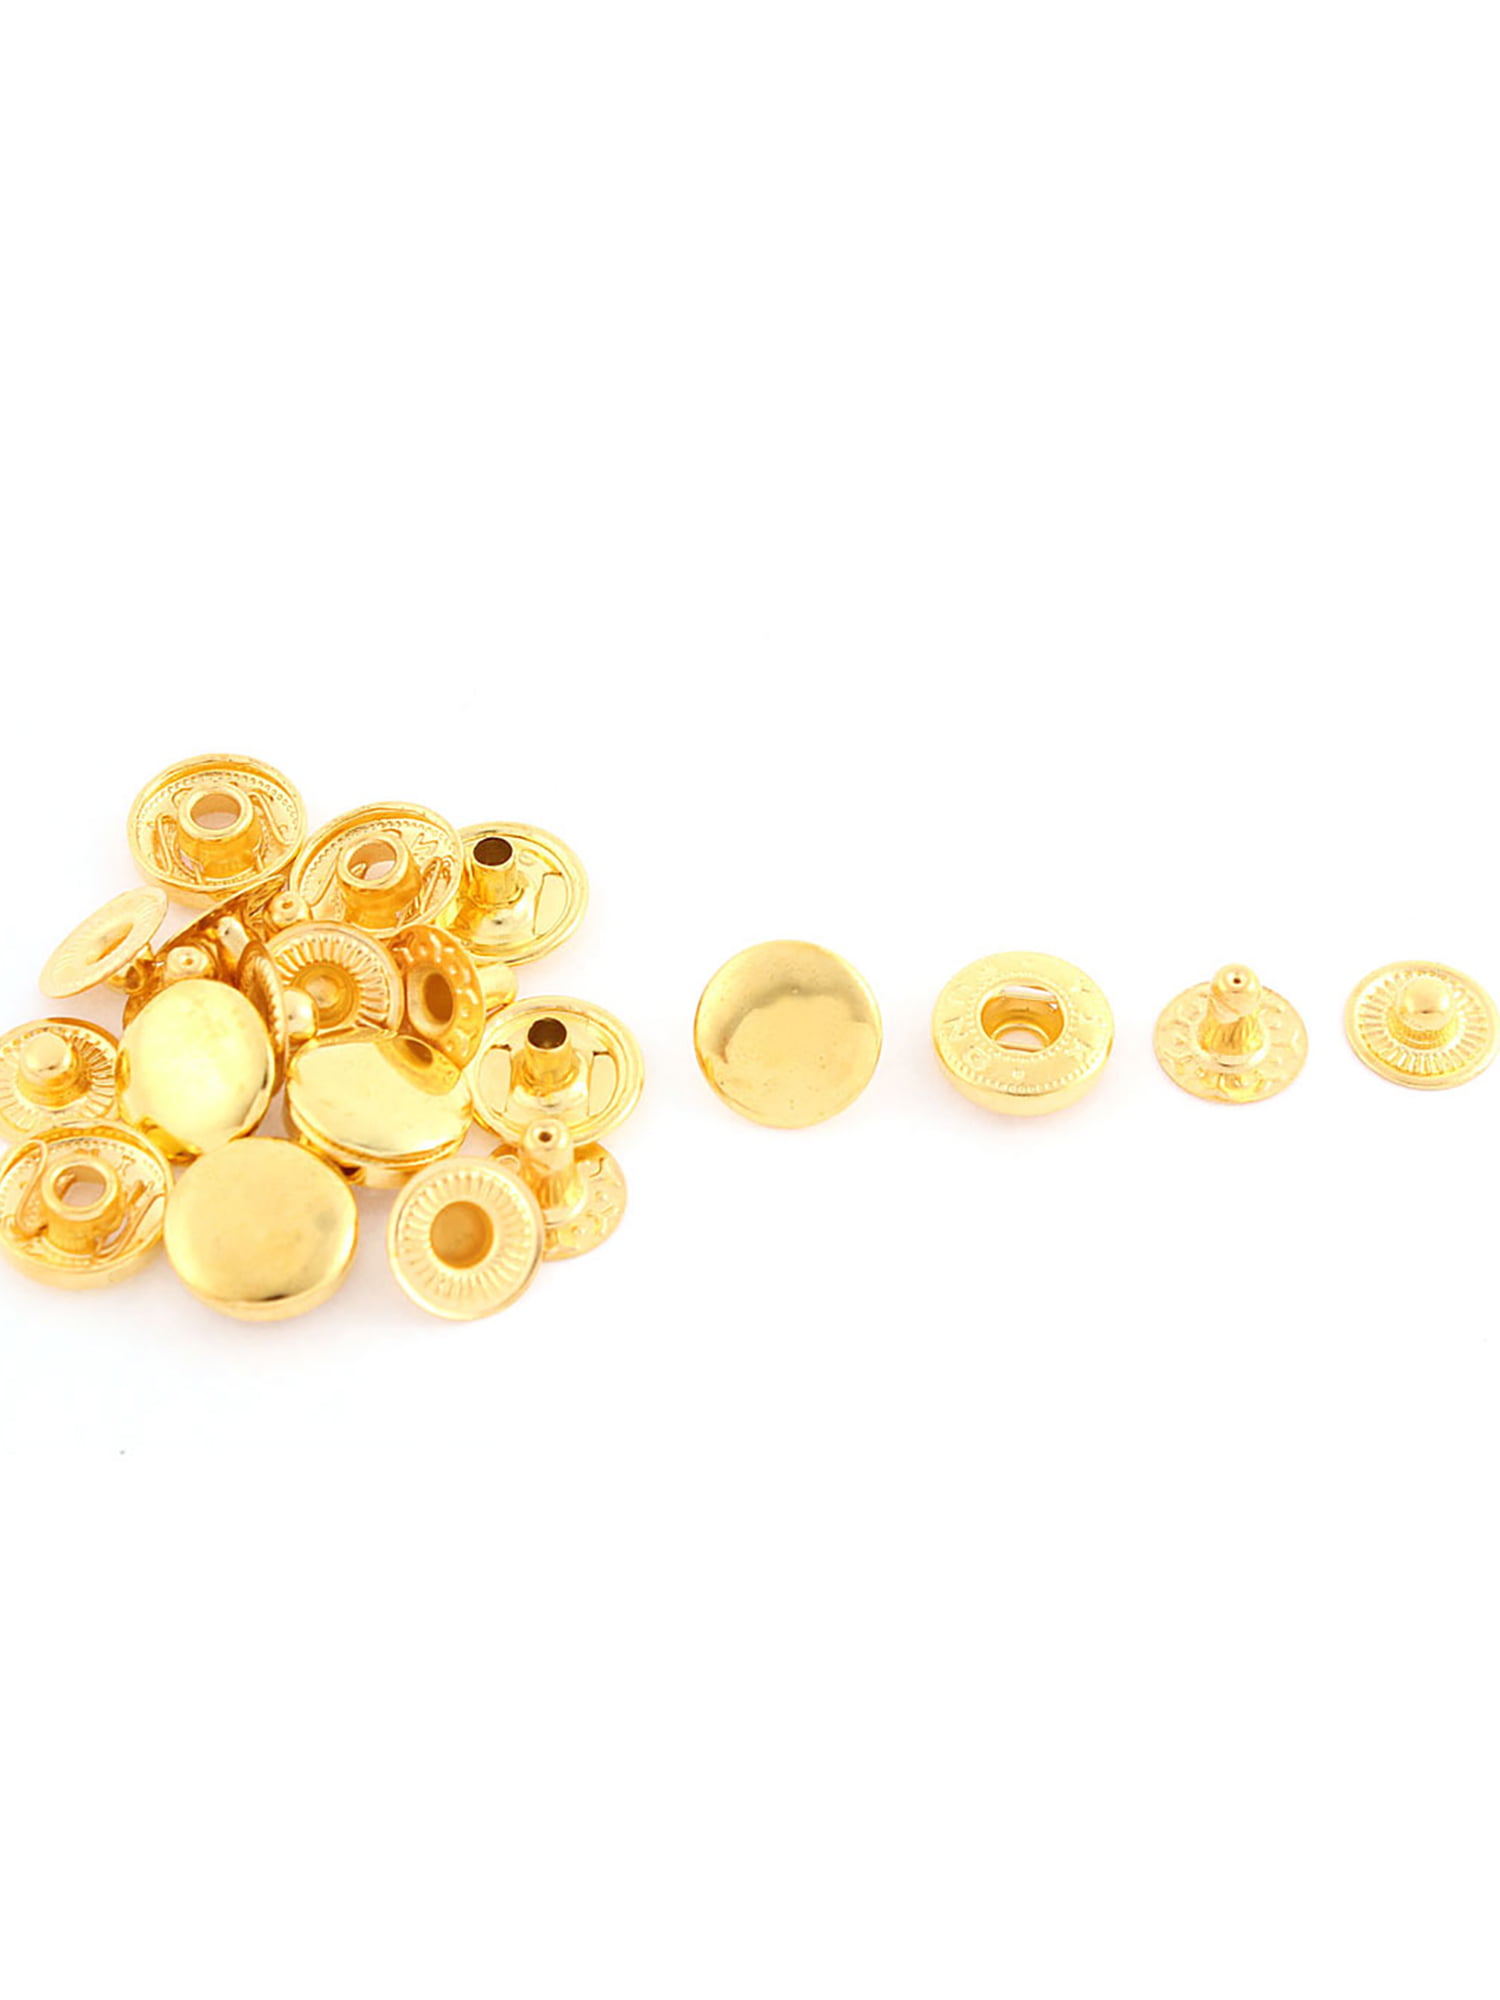 1/2" Gold Tone Metal Sewing on Buttons 8 Pcs #B127 